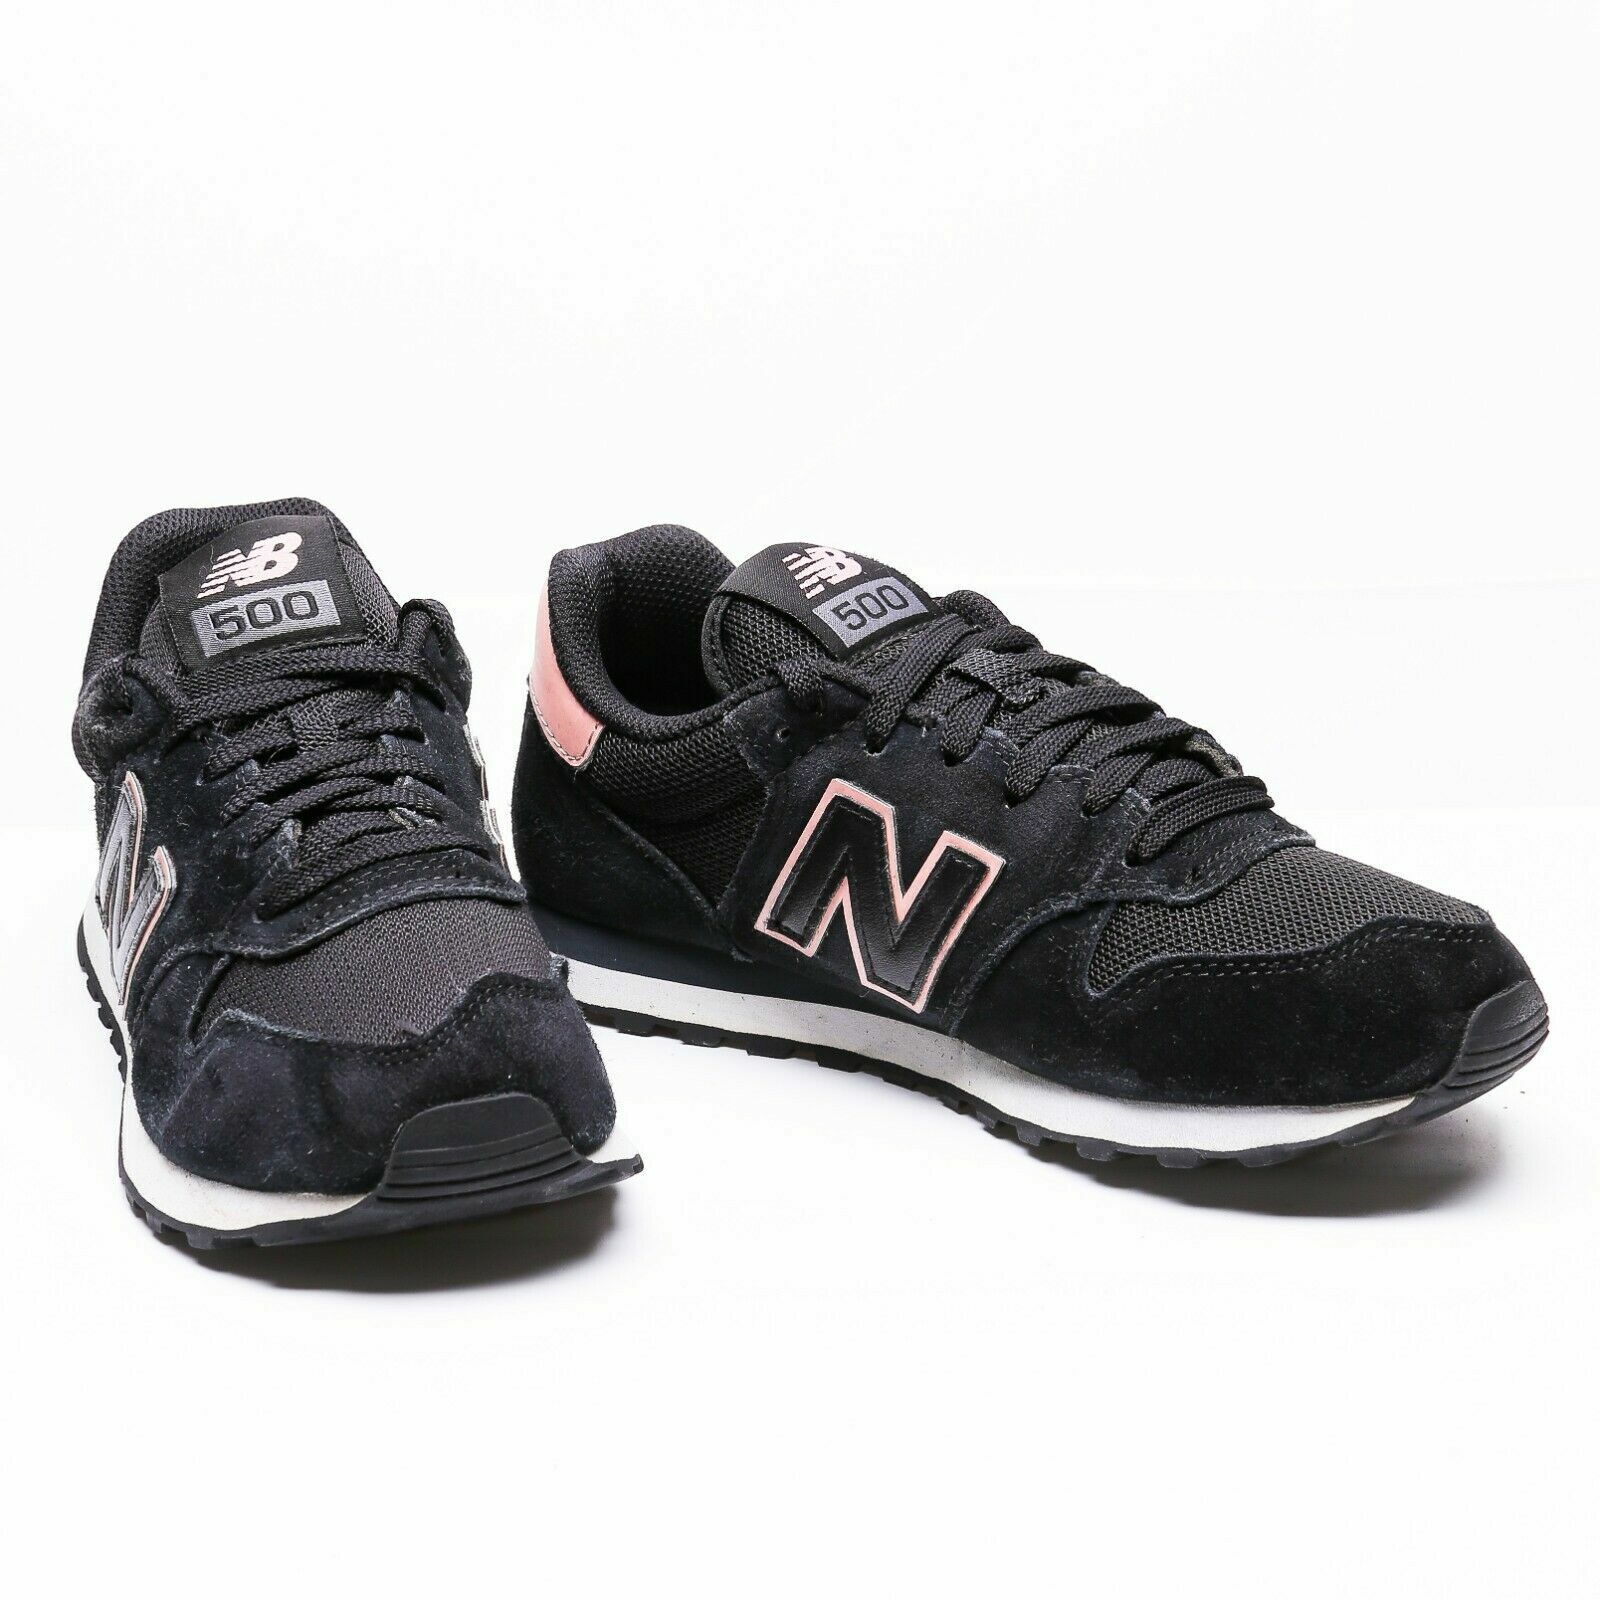 New Balance Women's GW500 lace up sneakers